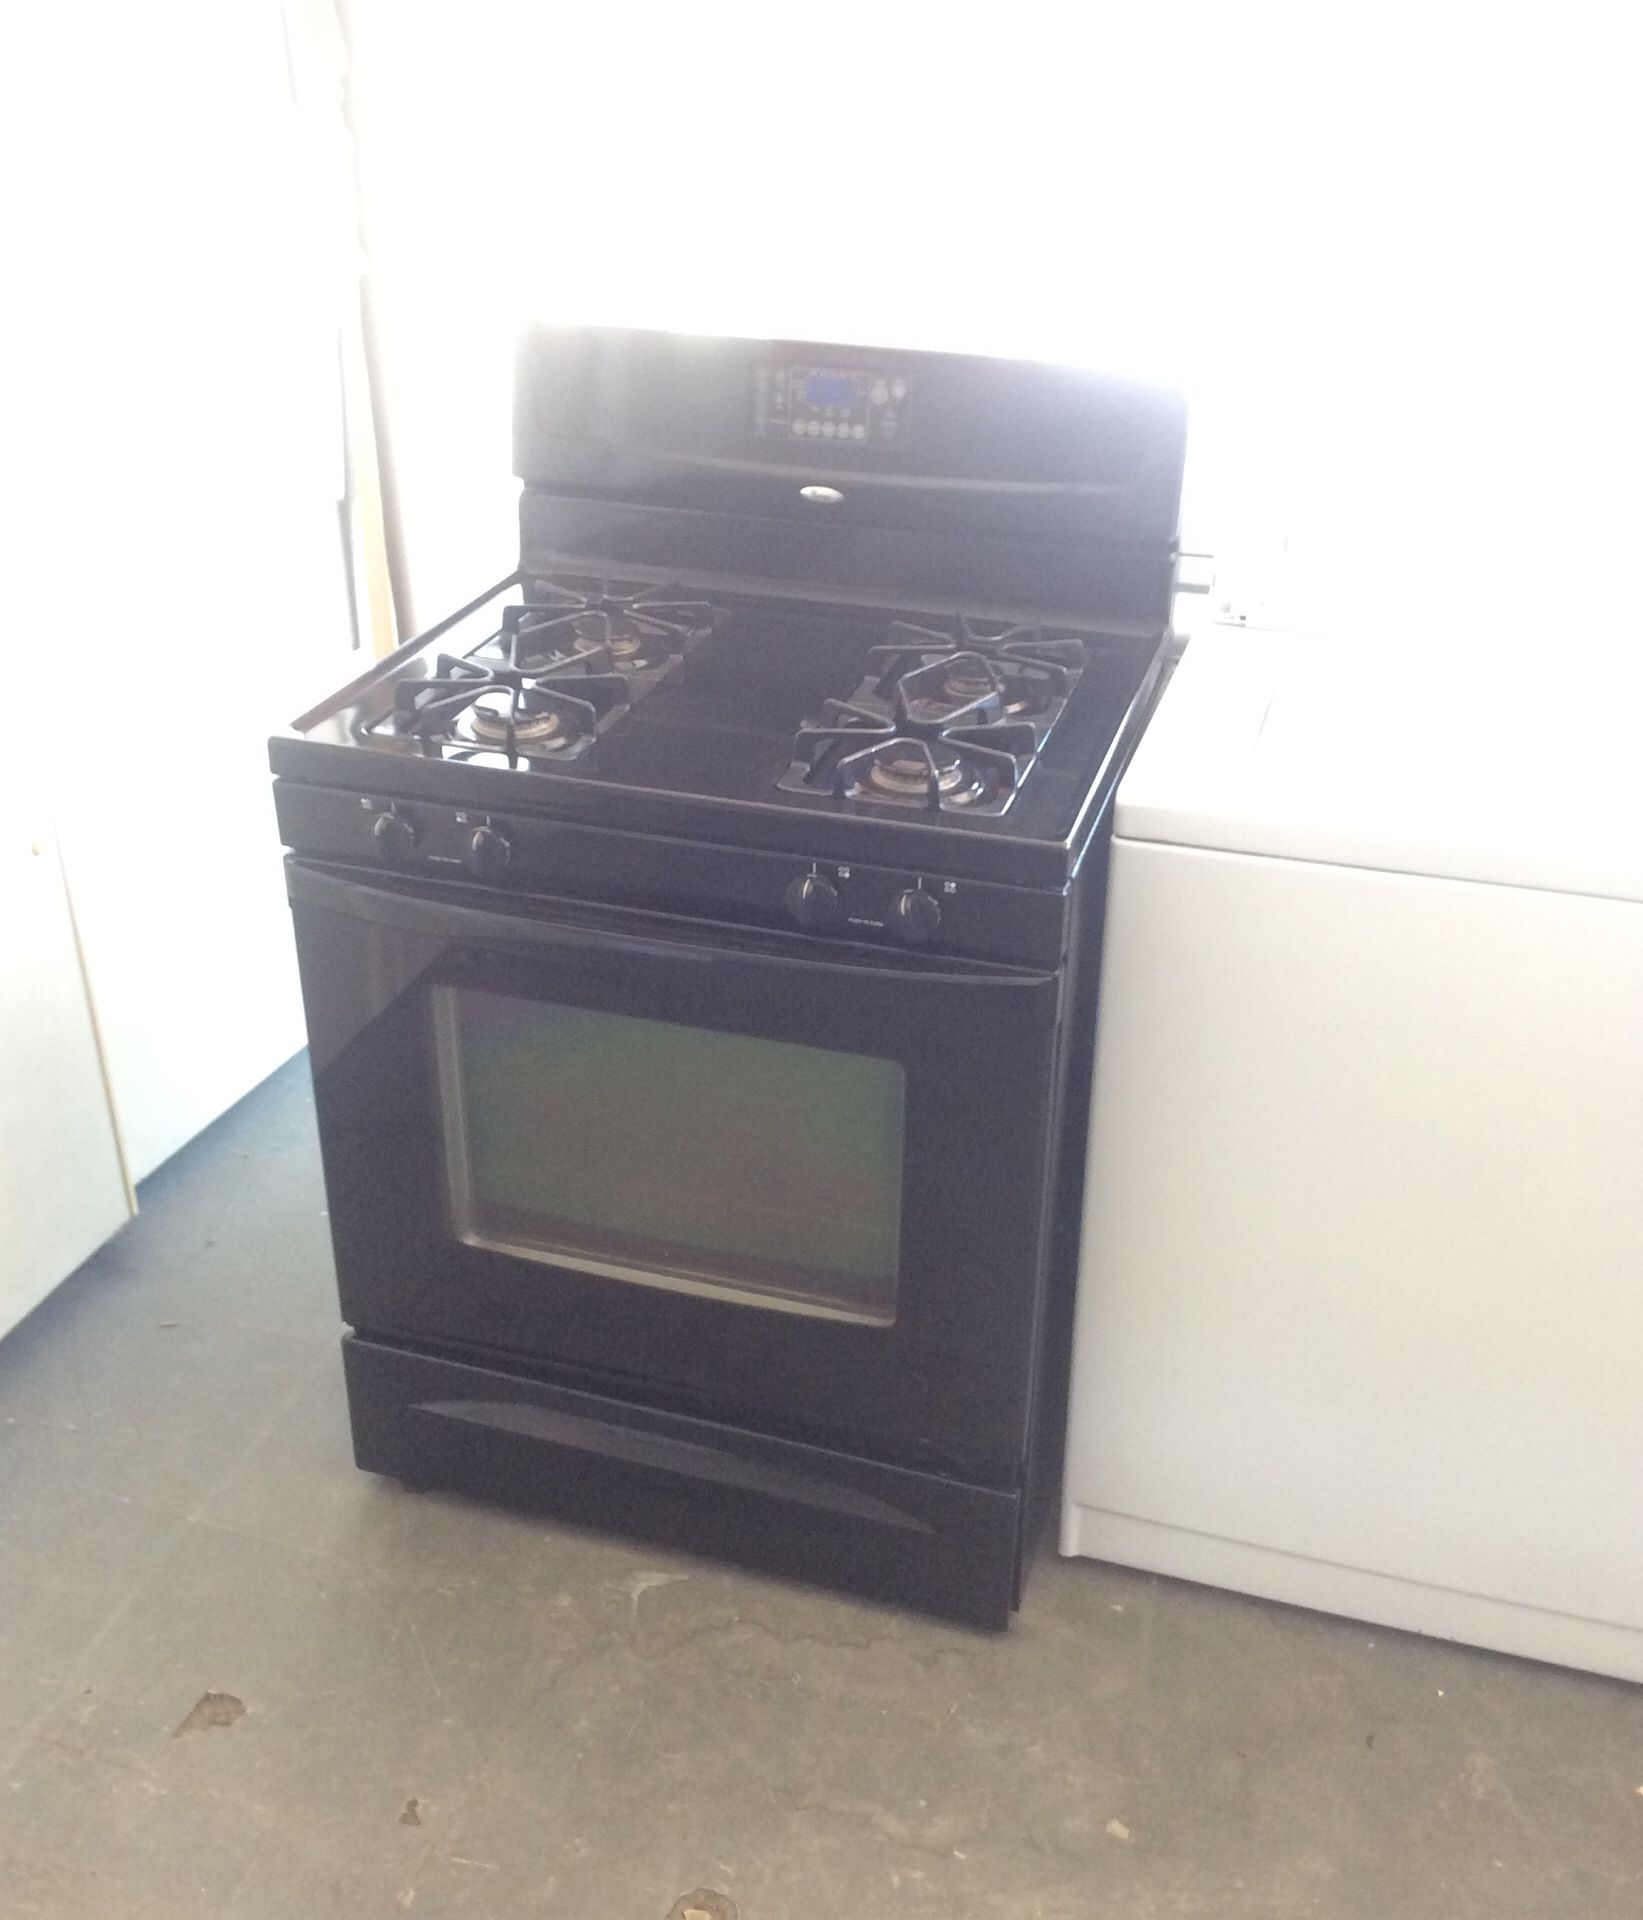 Whirlpool, gas, self cleaning oven, black four Burner oven